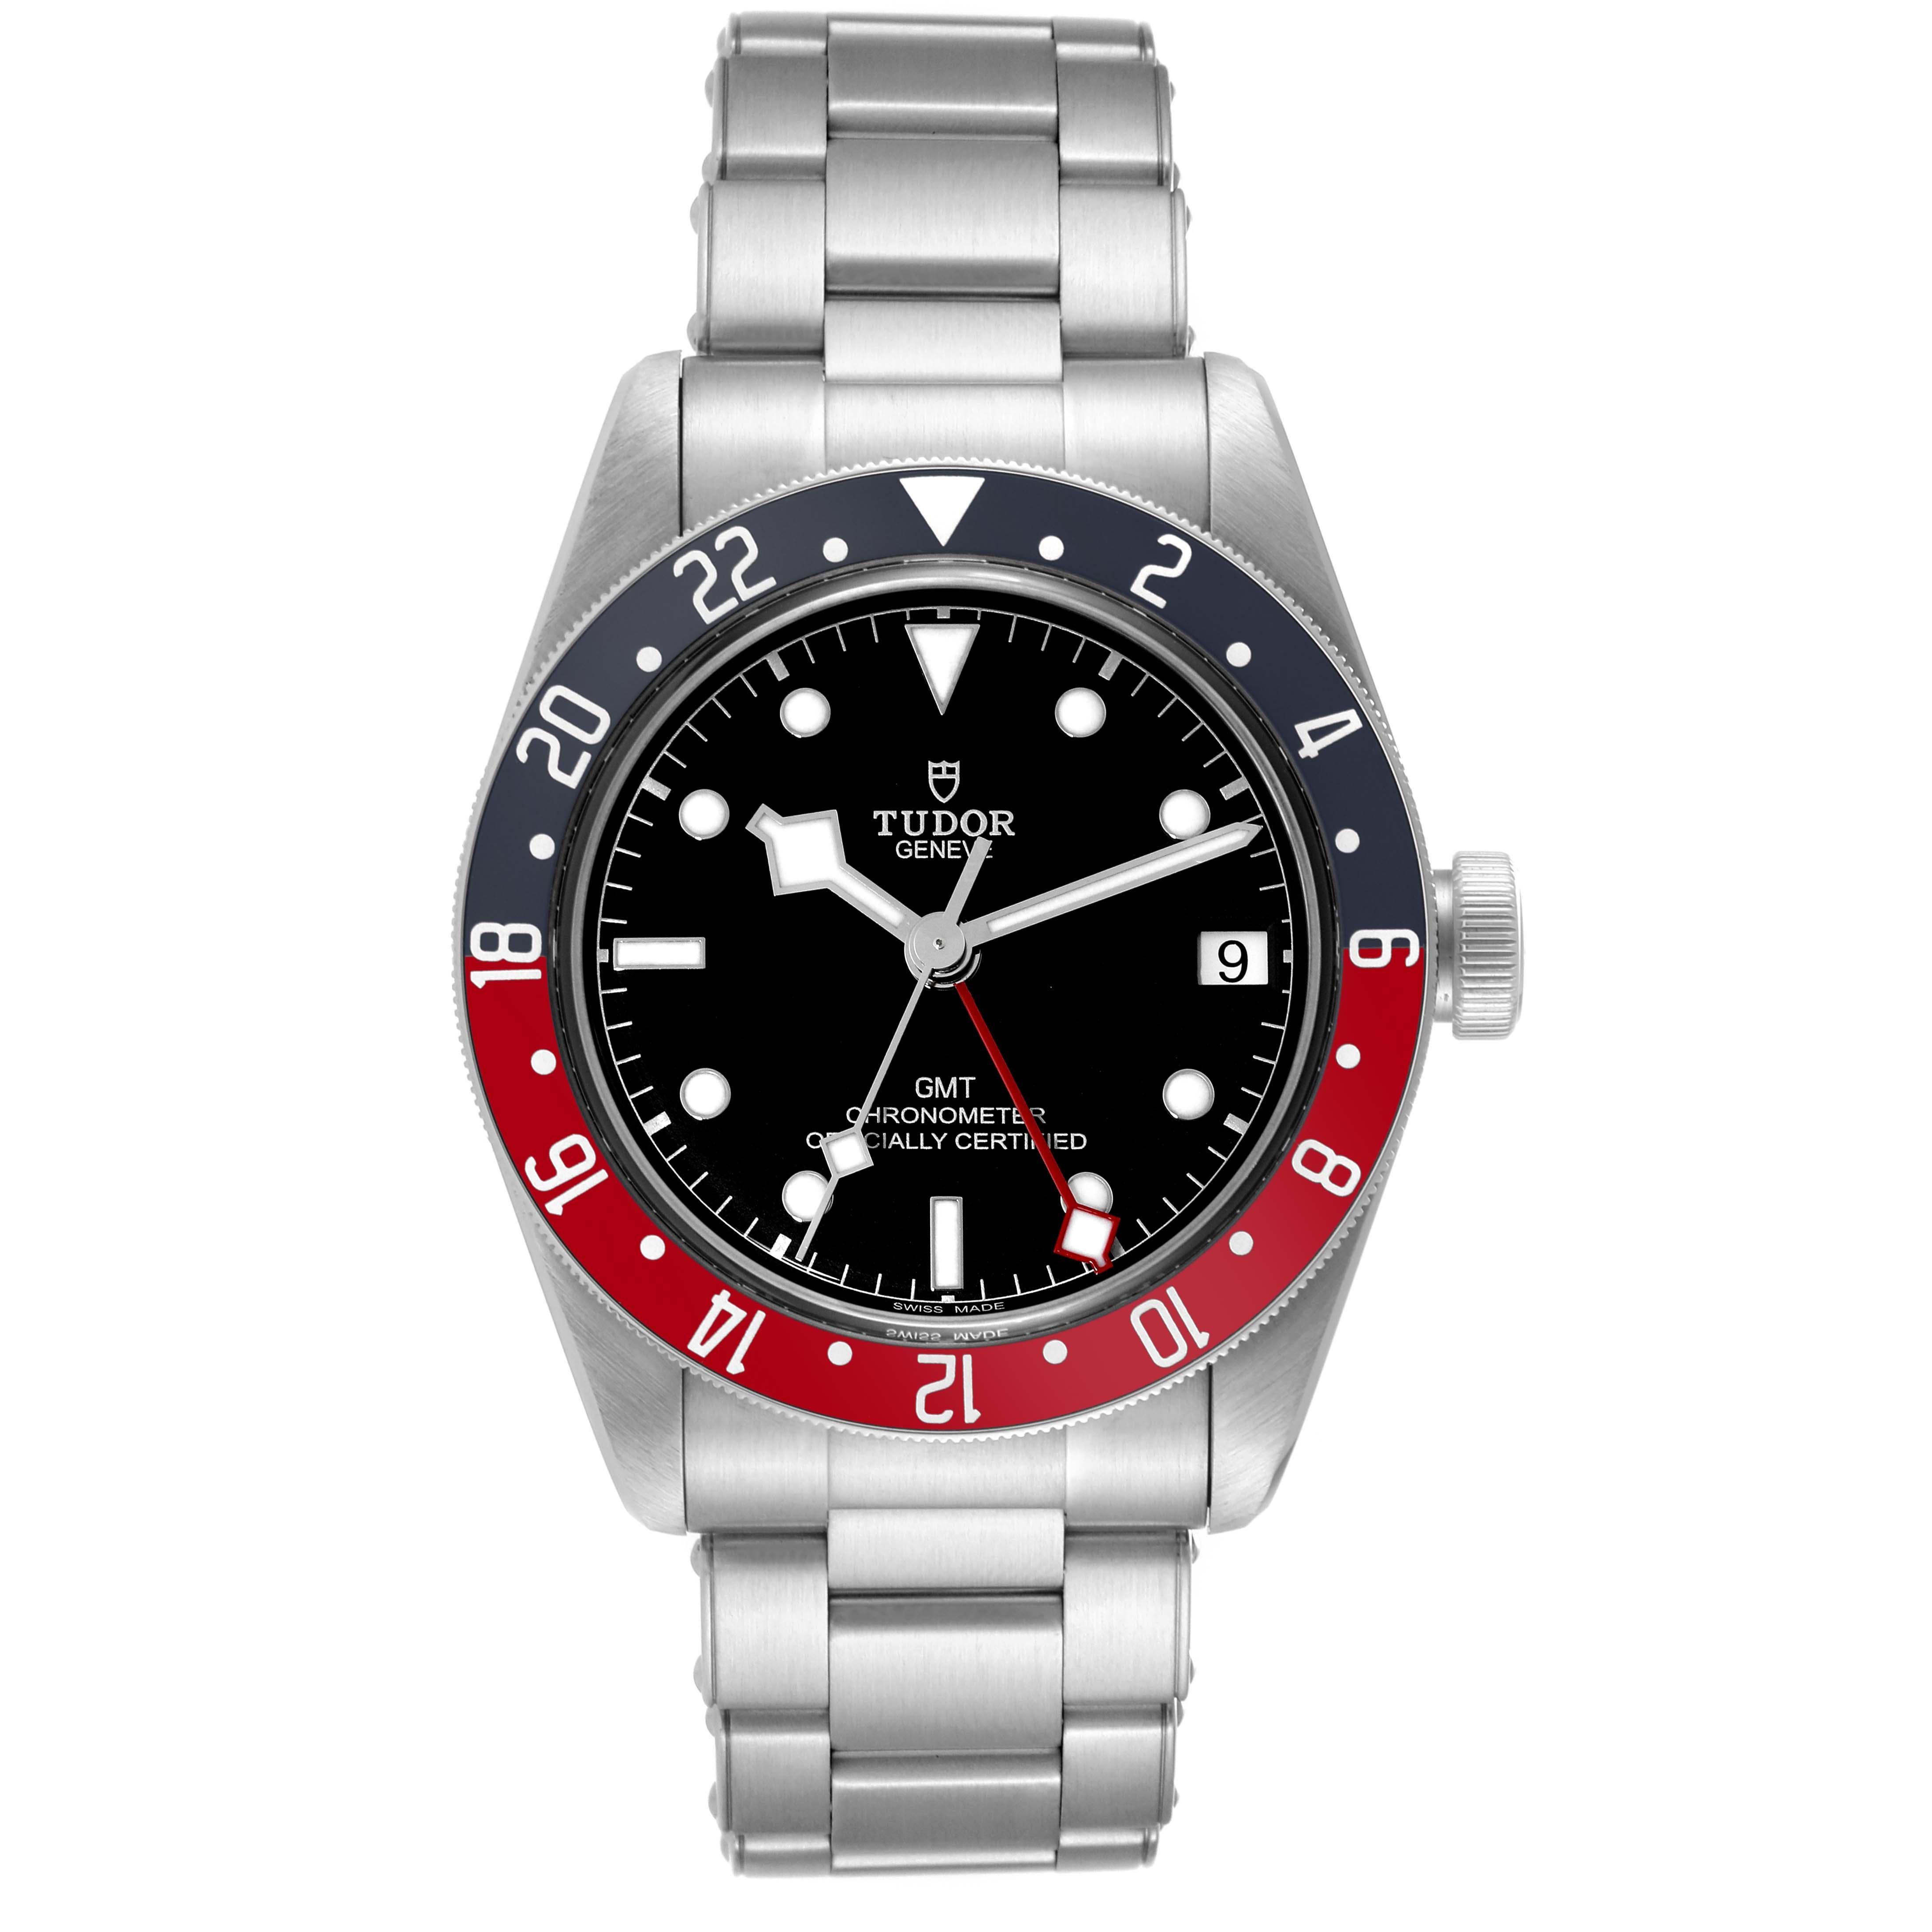 Tudor Heritage Black Bay GMT Pepsi Bezel Steel Mens Watch 79830RB Box Card. Automatic self-winding movement. Stainless steel oyster case 41.0 mm in diameter. Tudor logo on a crown. Bidirectional rotating red and blue (pepsi) bezel. Scratch resistant